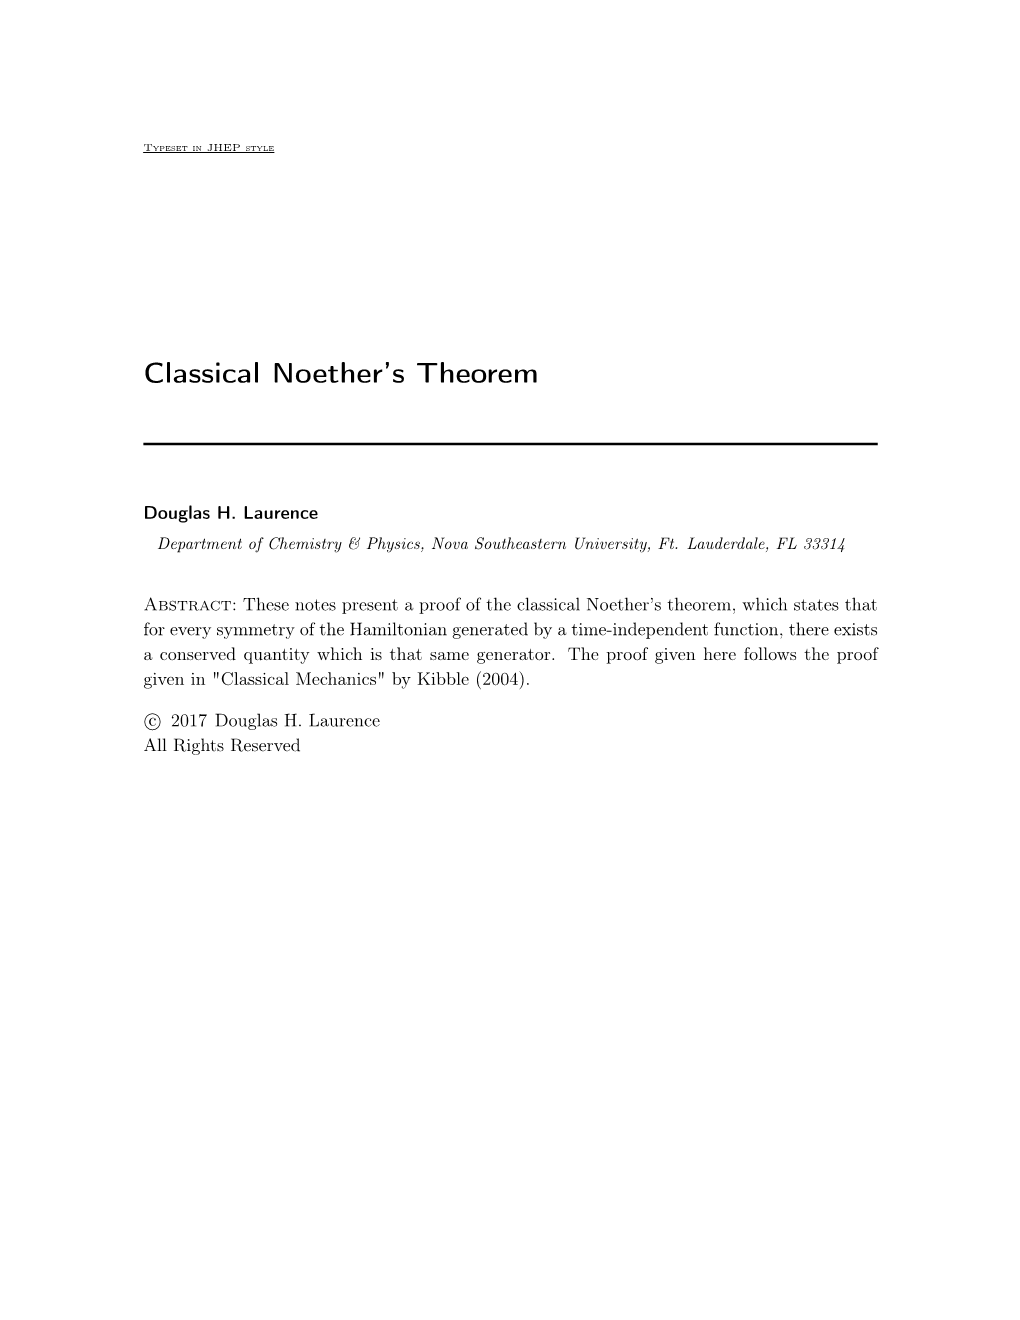 Classical Noether's Theorem